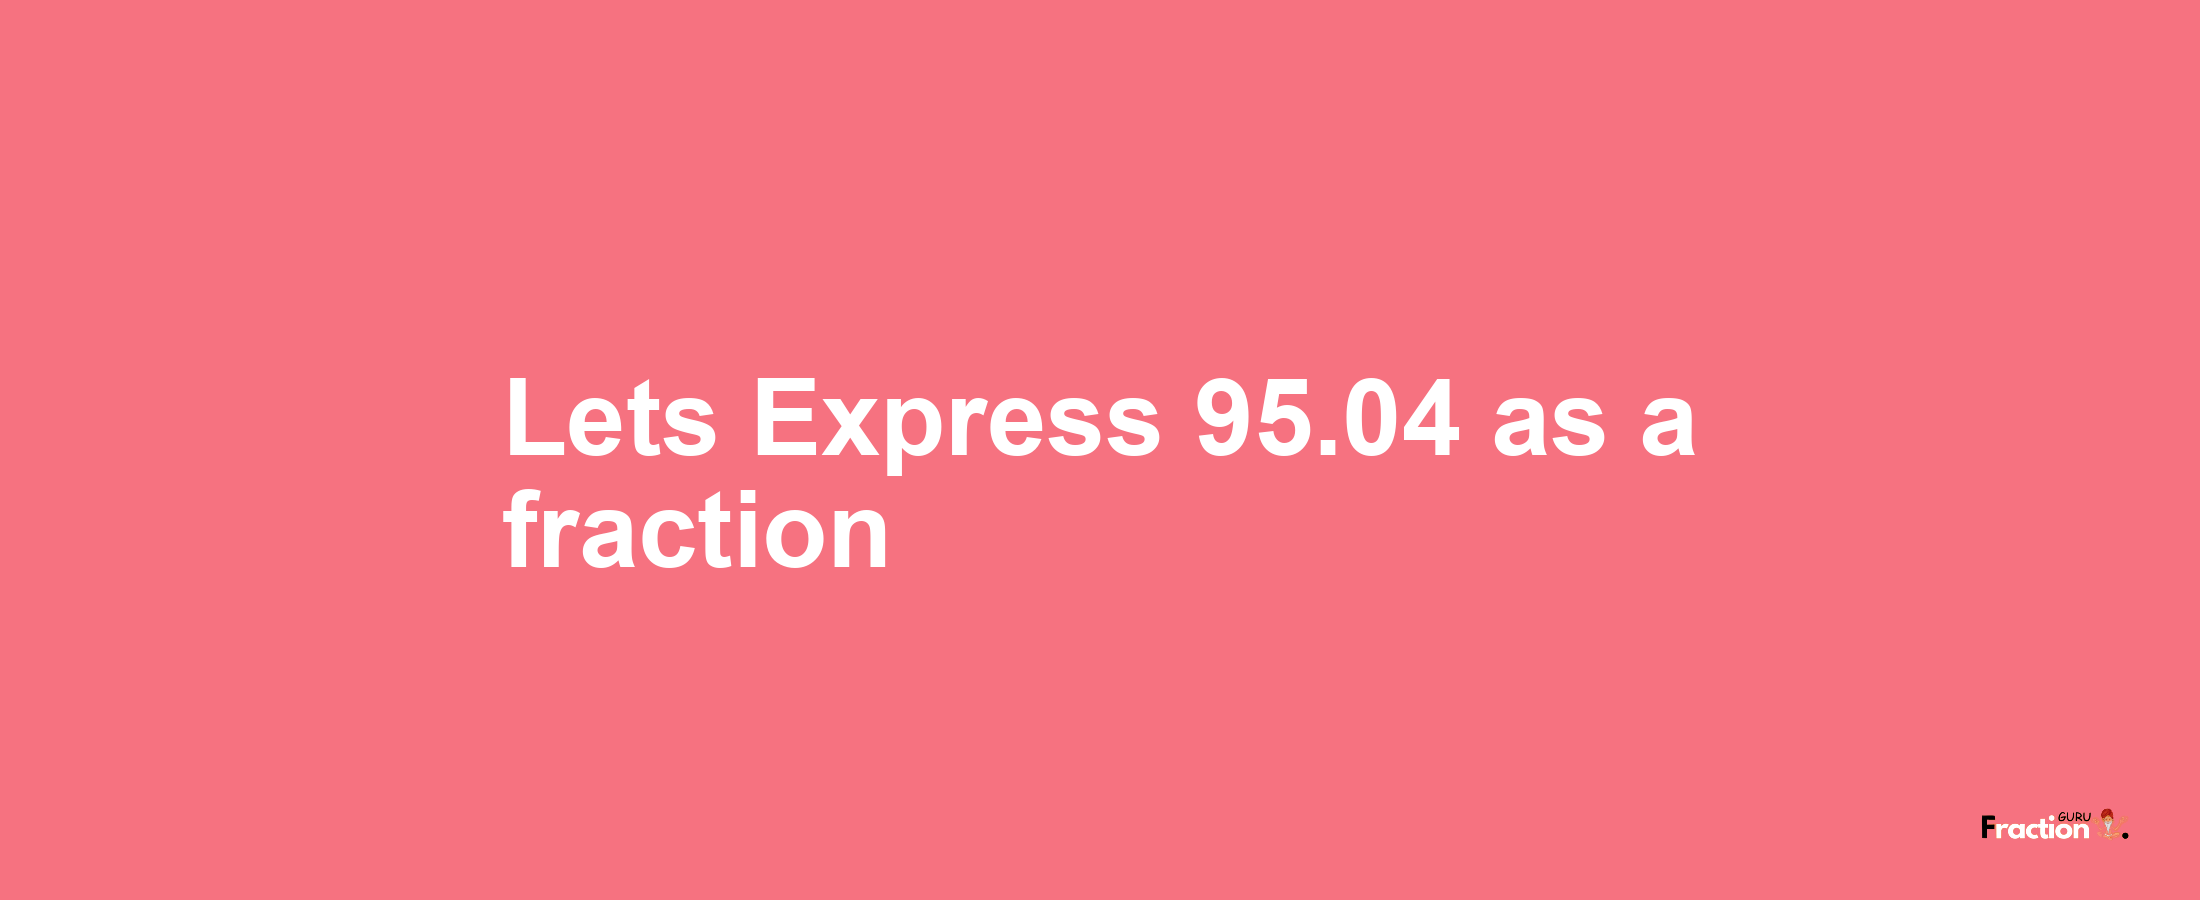 Lets Express 95.04 as afraction